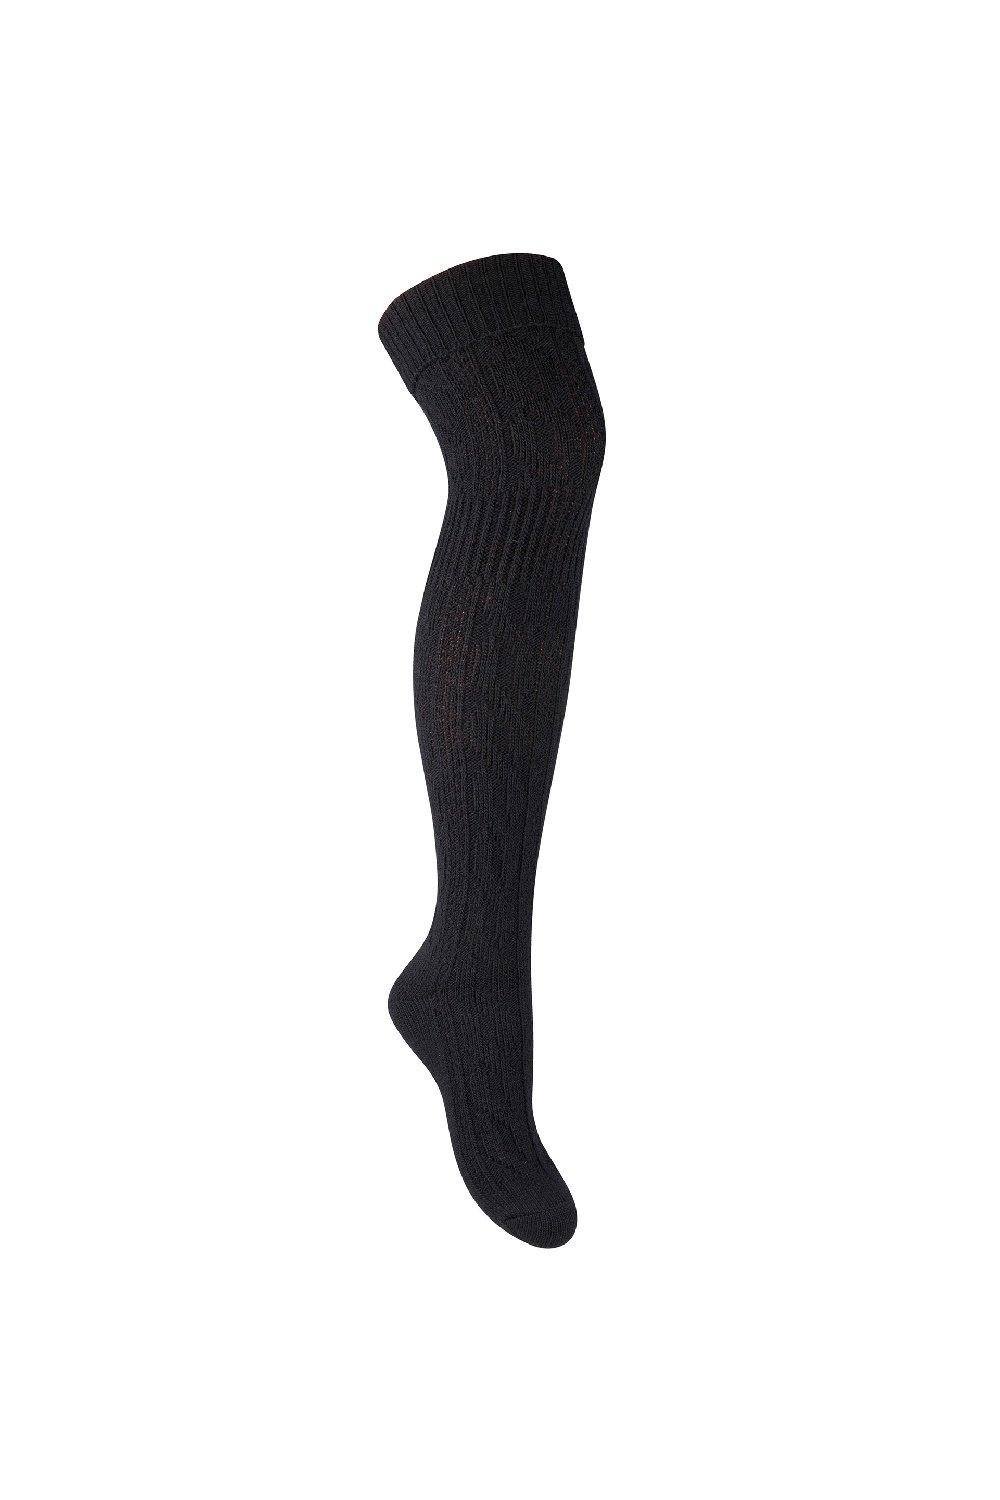 Thigh High Wool Winter Warm Thick Over The Knee Socks